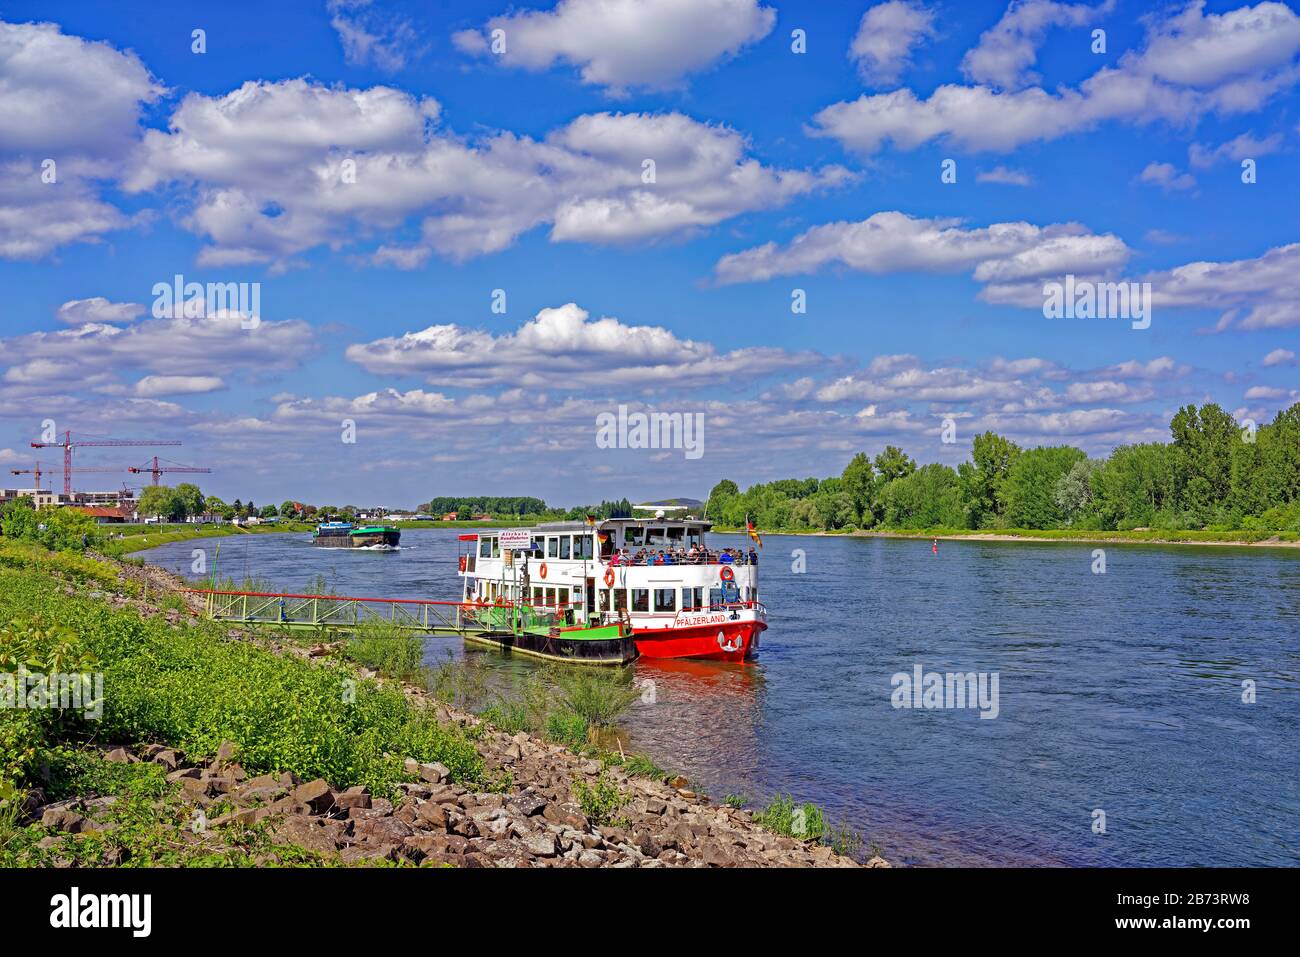 Germany, Rhineland-Palatinate, Speyer, Rhine avenue, SchUM town, river, the Rhine, round trip ship, inland ship, plants, trees, people, people, place Stock Photo